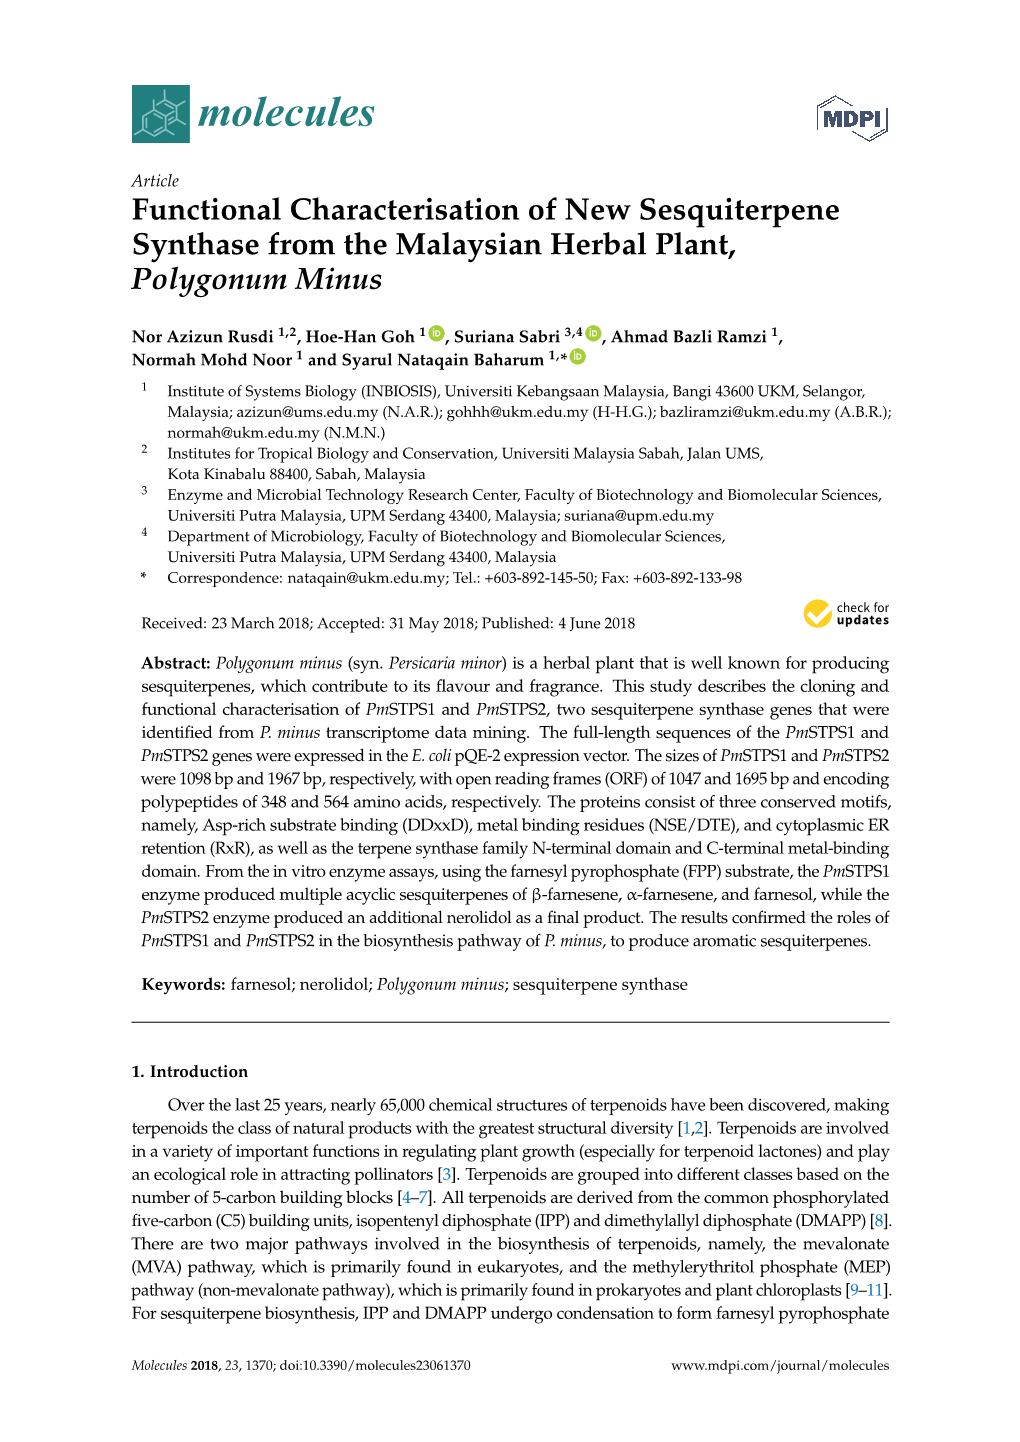 Functional Characterisation of New Sesquiterpene Synthase from the Malaysian Herbal Plant, Polygonum Minus